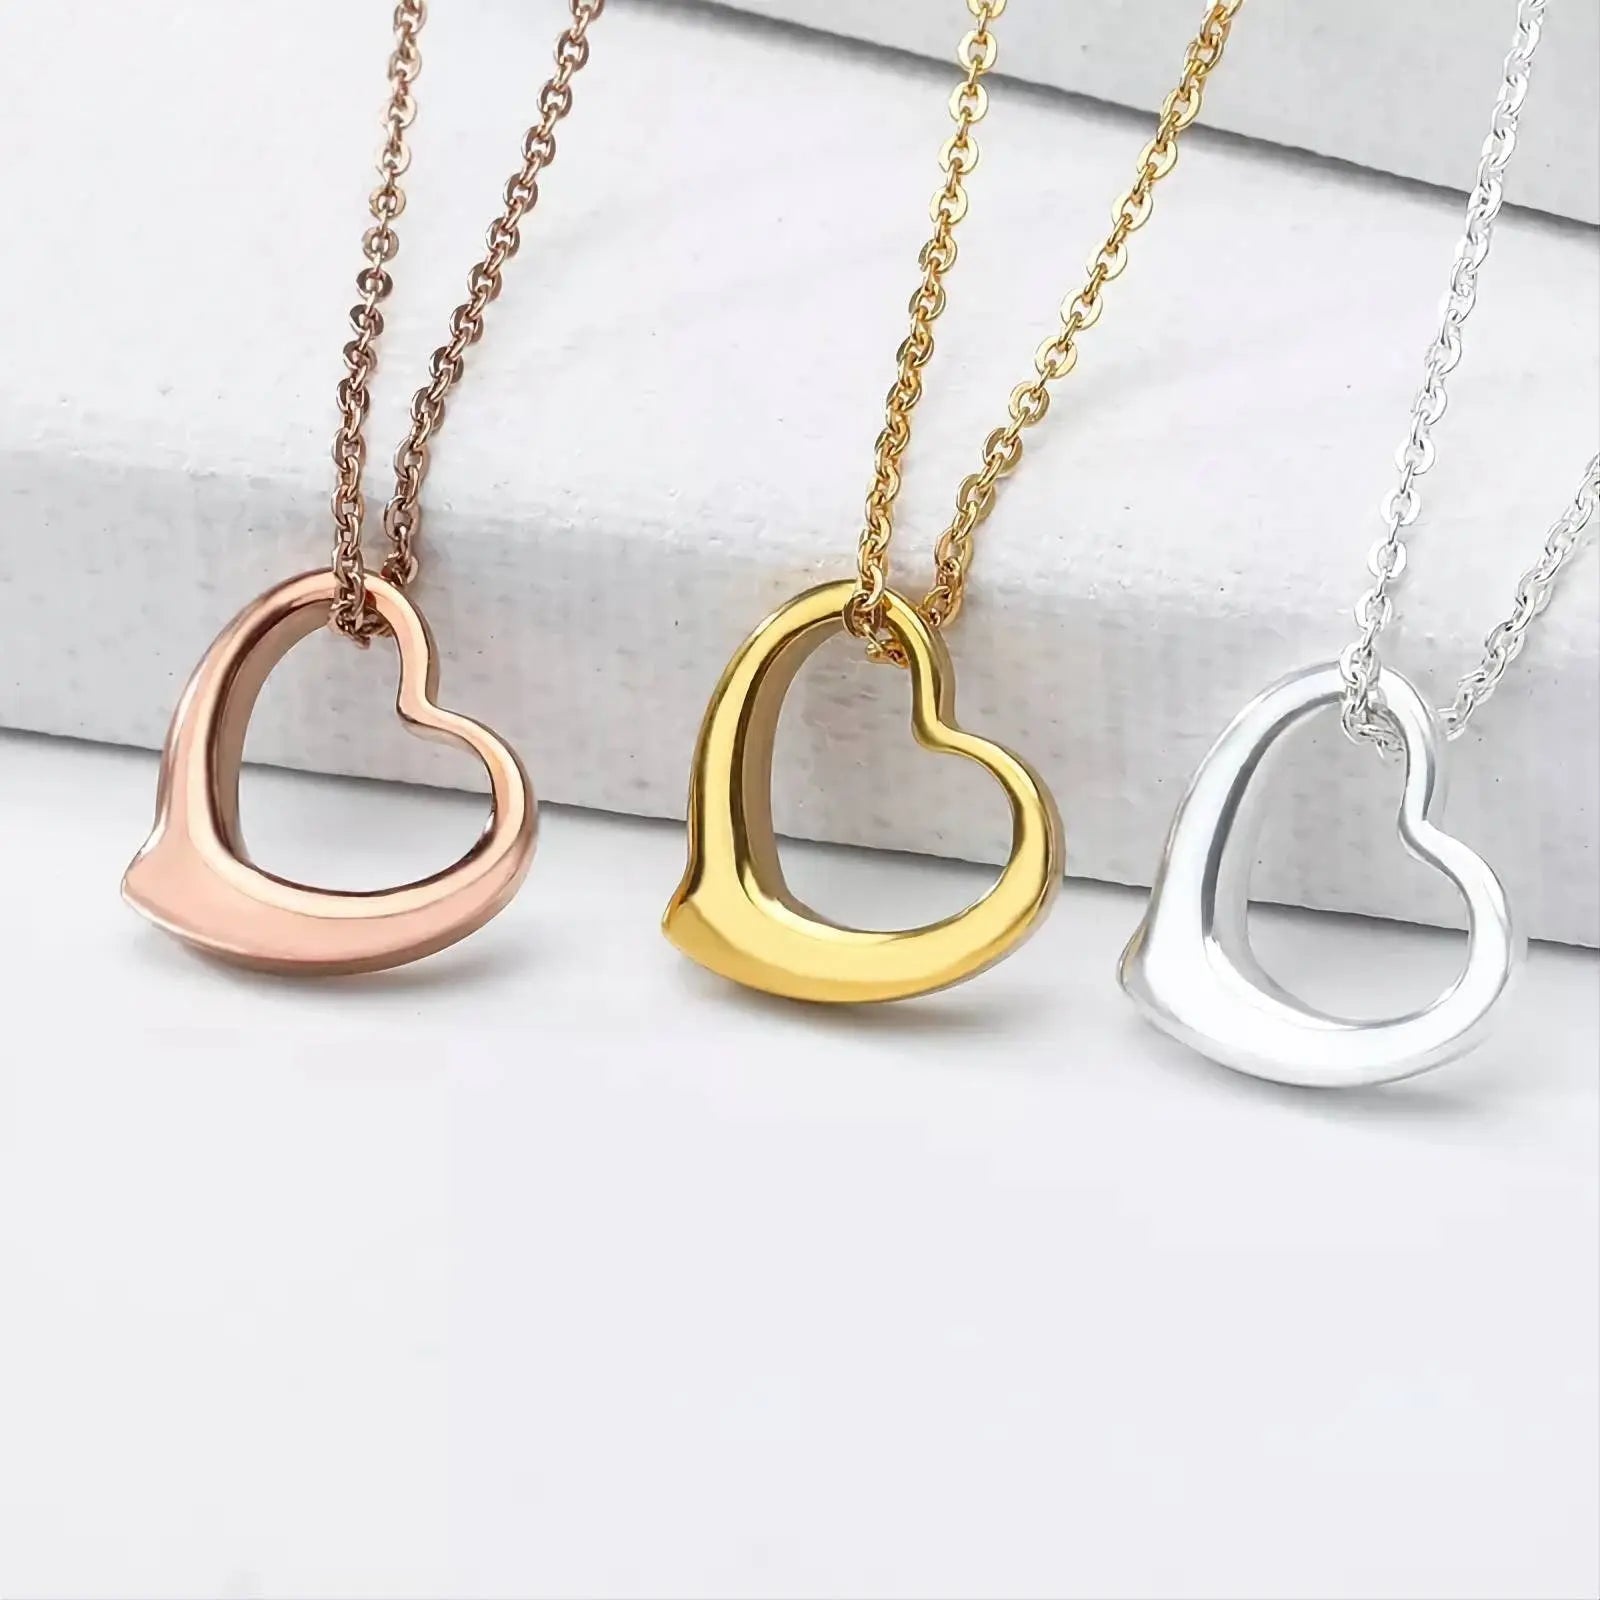 18K Gold Hollow Heart Shape Pendant Necklace for Women Stainless Steel Gold Plated JettsJewelers